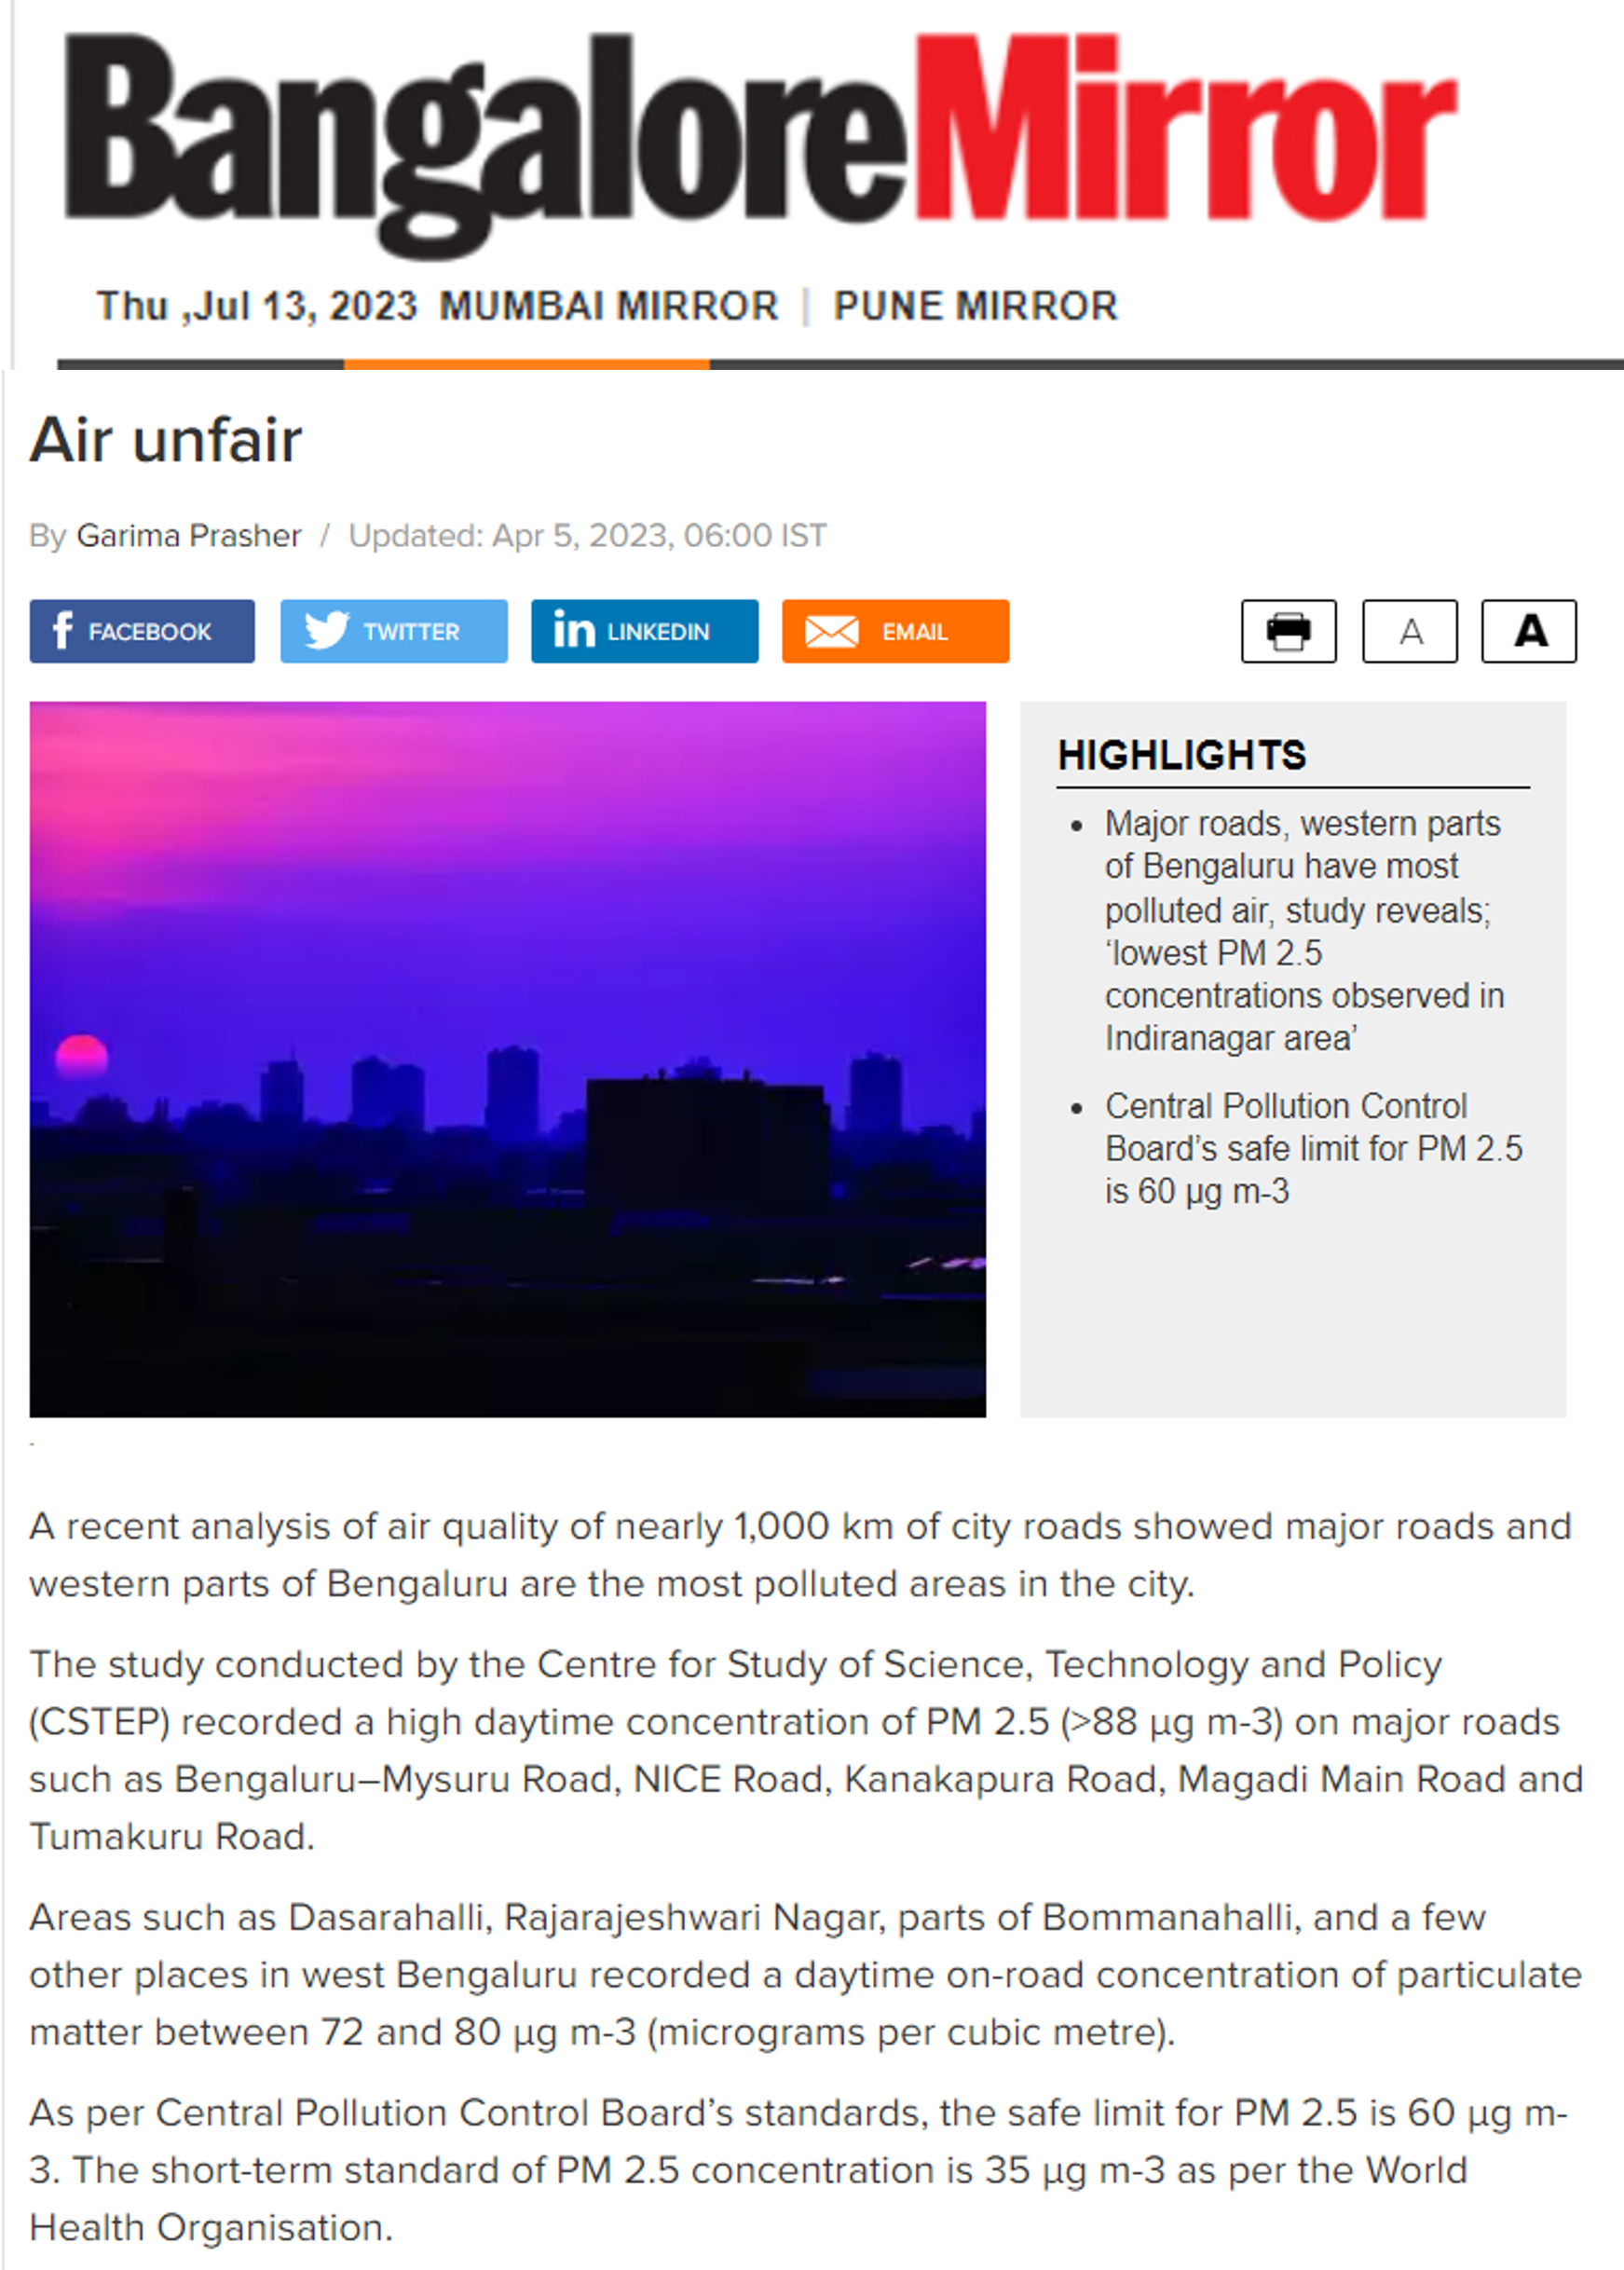 CSTEP’s study mentioned in and Dr Pratima Singh quoted by Bangalore Mirror on air pollutants over Bengaluru city roads